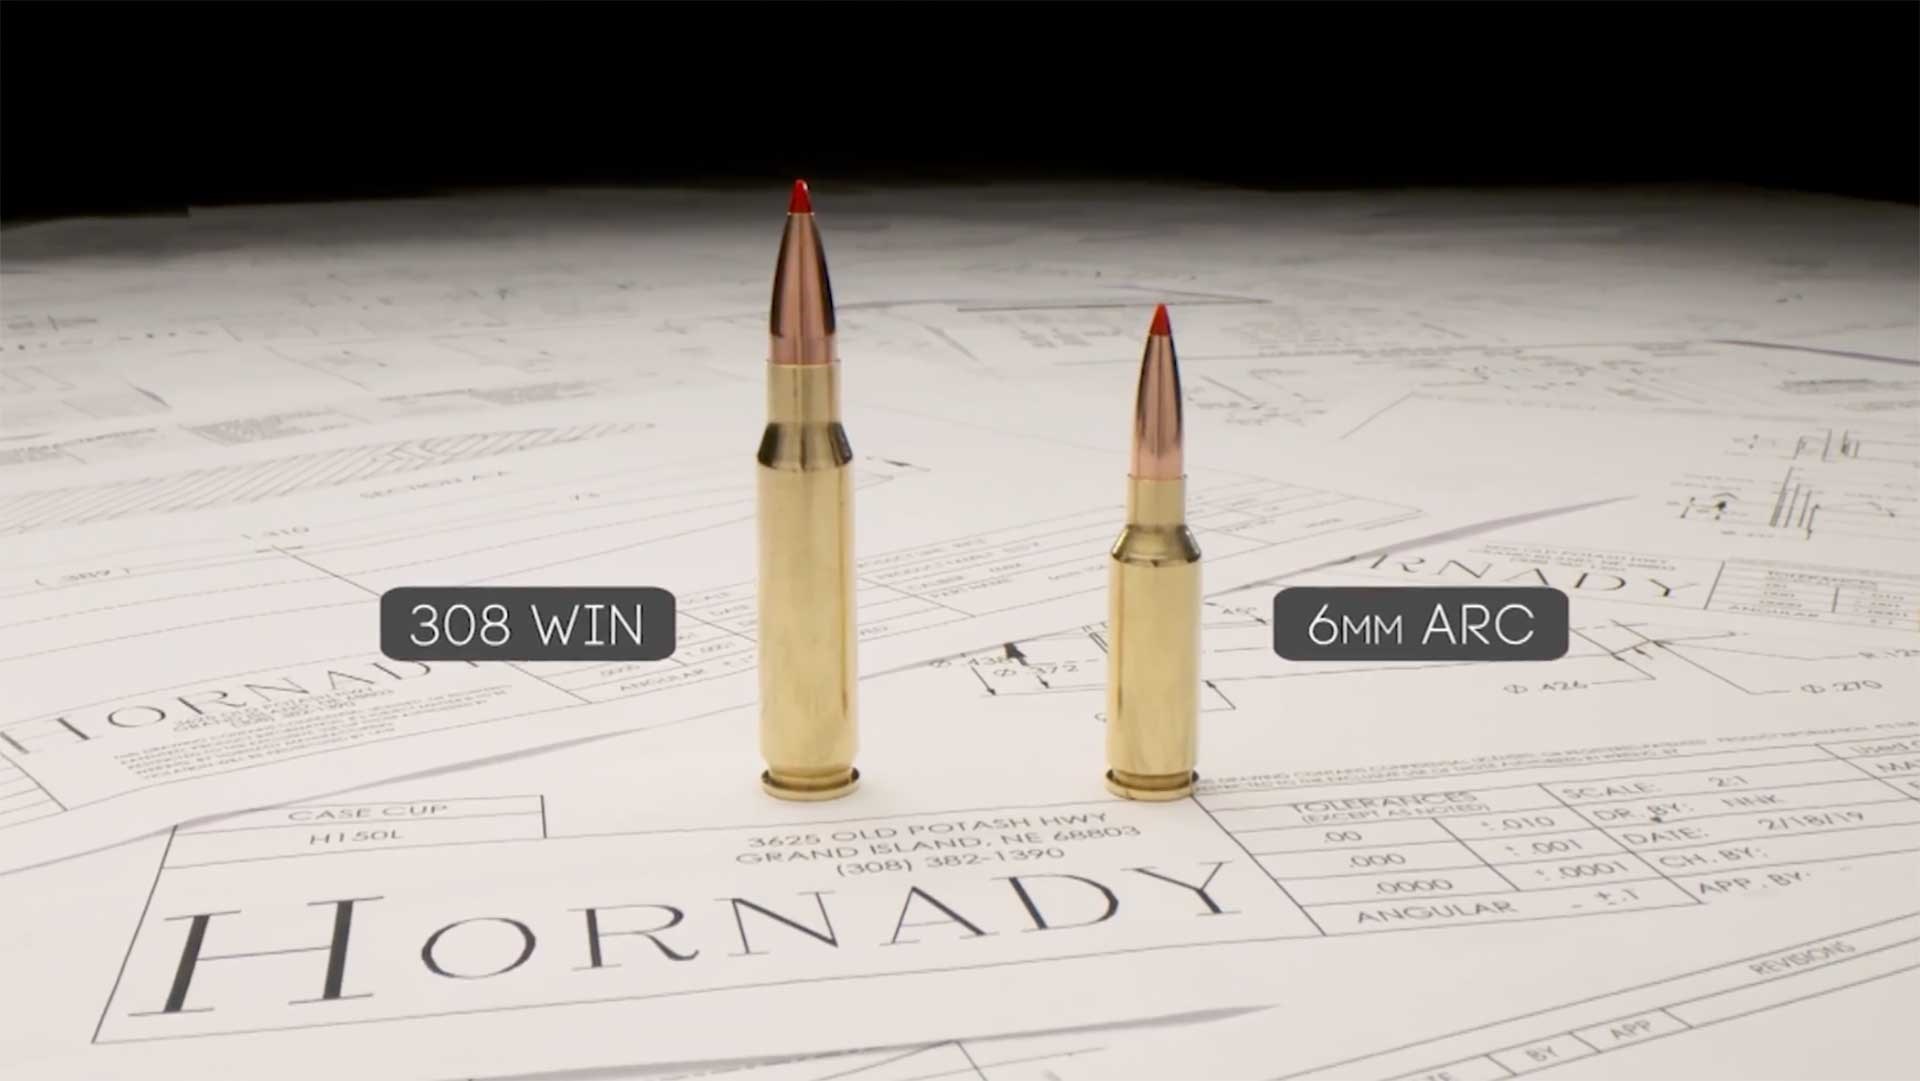 Hornady 6mm ARC shown on the right compared to the .308 Winchester shown at the left.